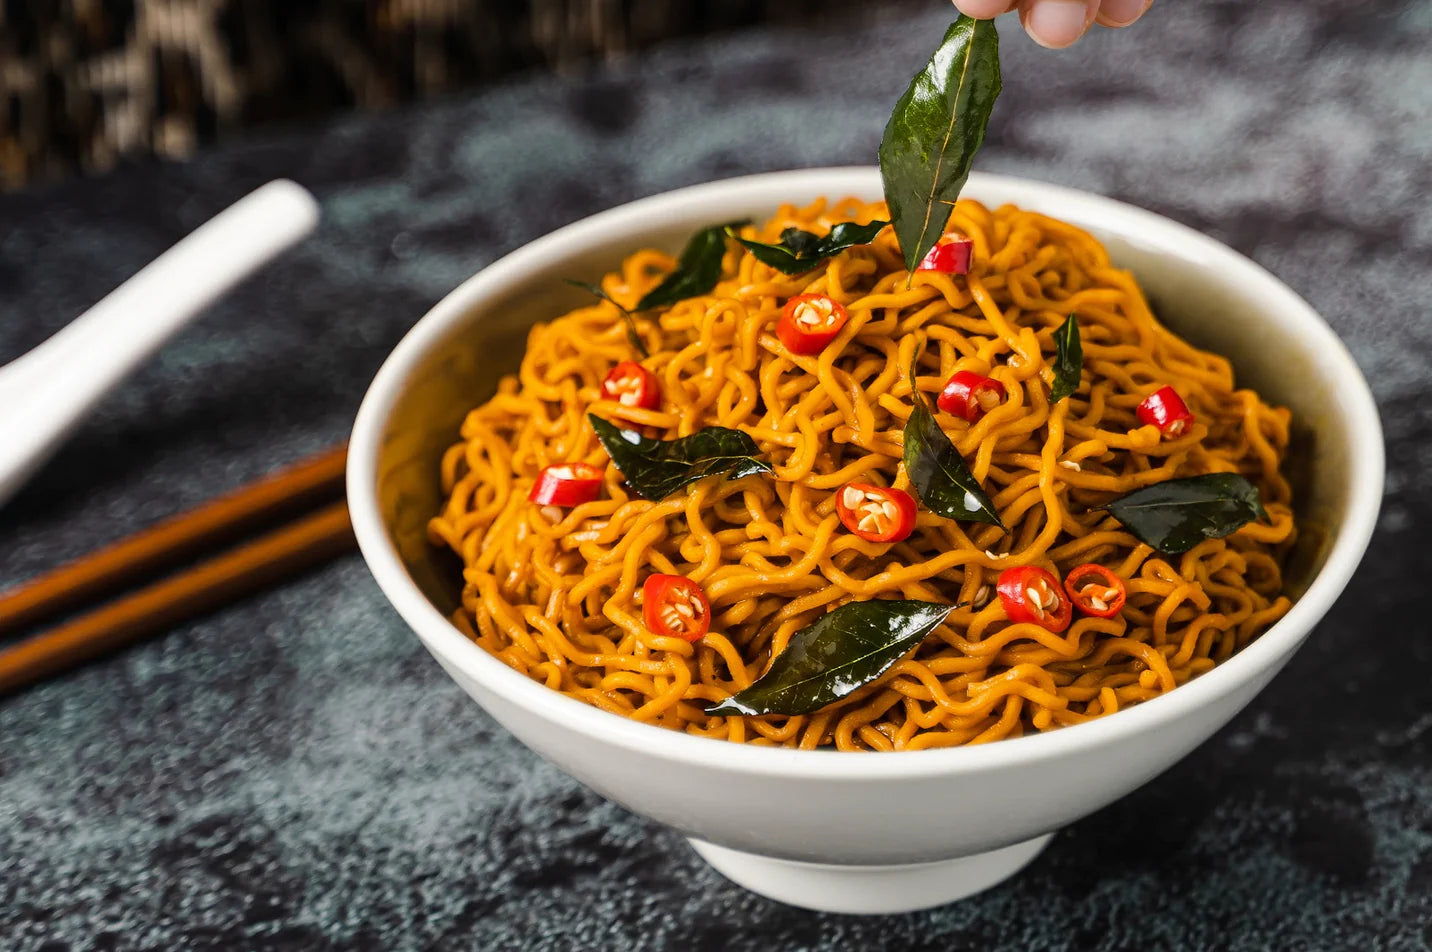 Reimagining Instant Noodles without Palm Oil